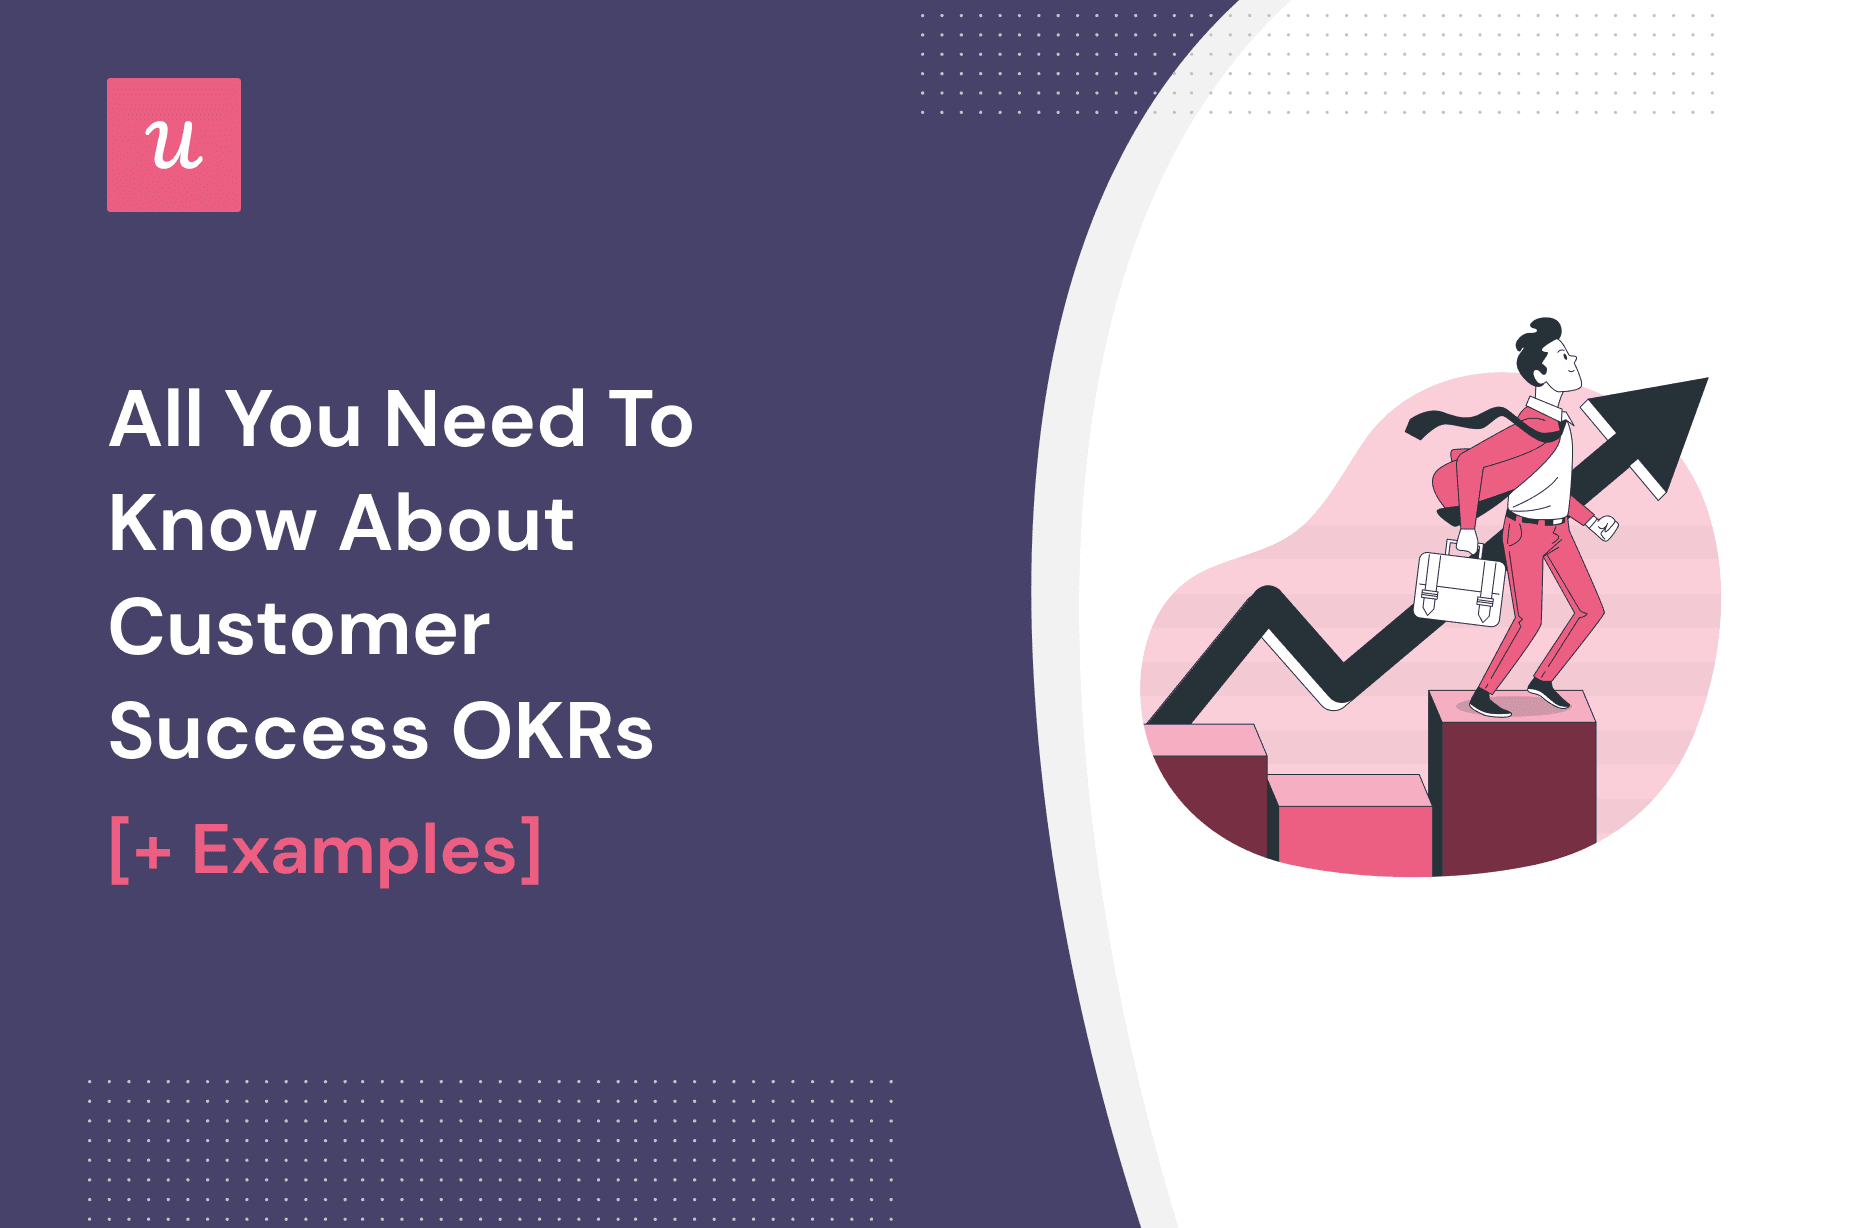 All-You-Need-to-Know-About-Customer-Success-OKRs